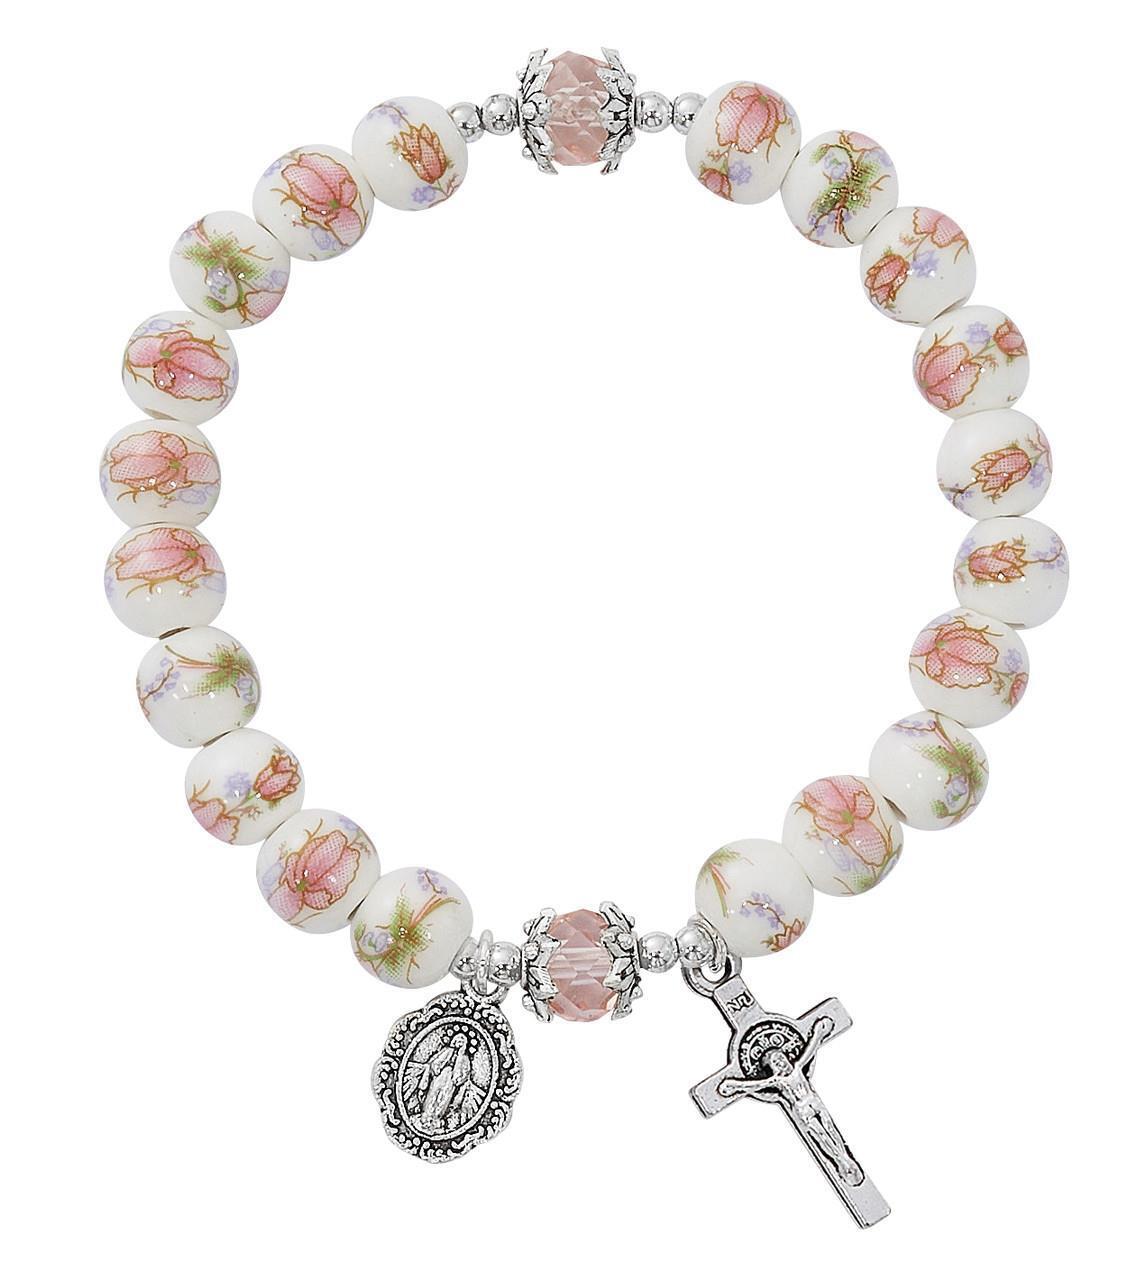 8mm Pink Ceramic 2 Decade Rosary Stretch Bracelet Comes Carded